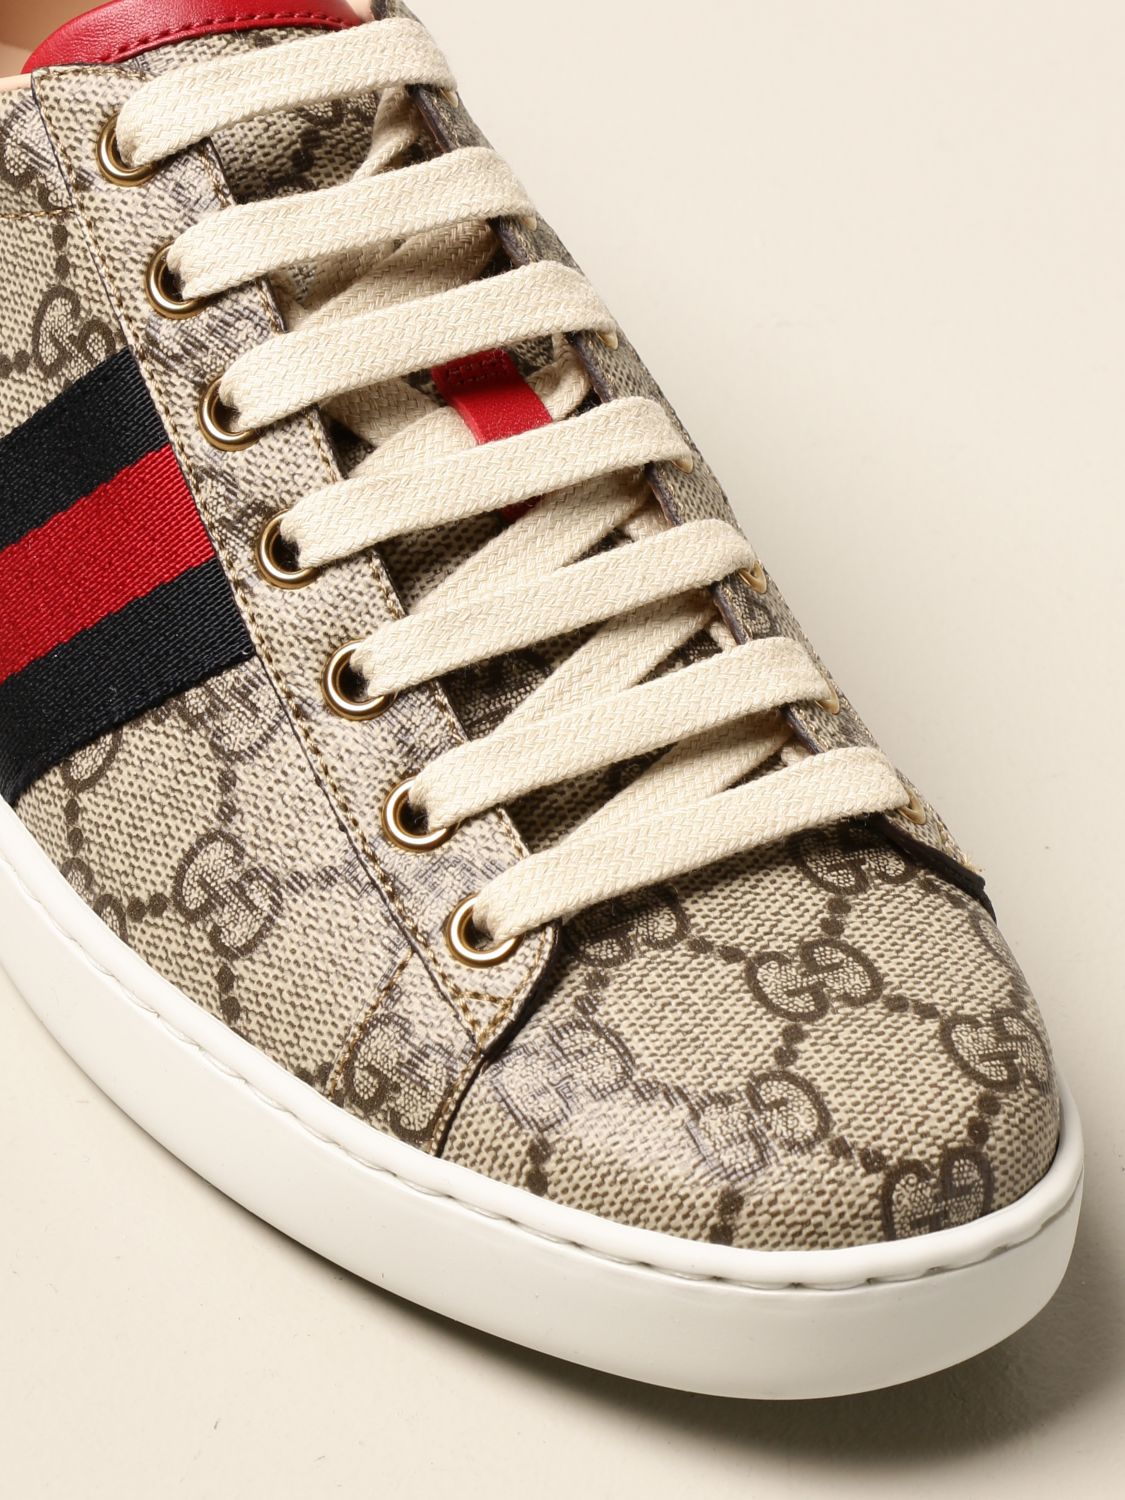 GUCCI: Ace sneakers in GG Supreme fabric with Web bands | Sneakers